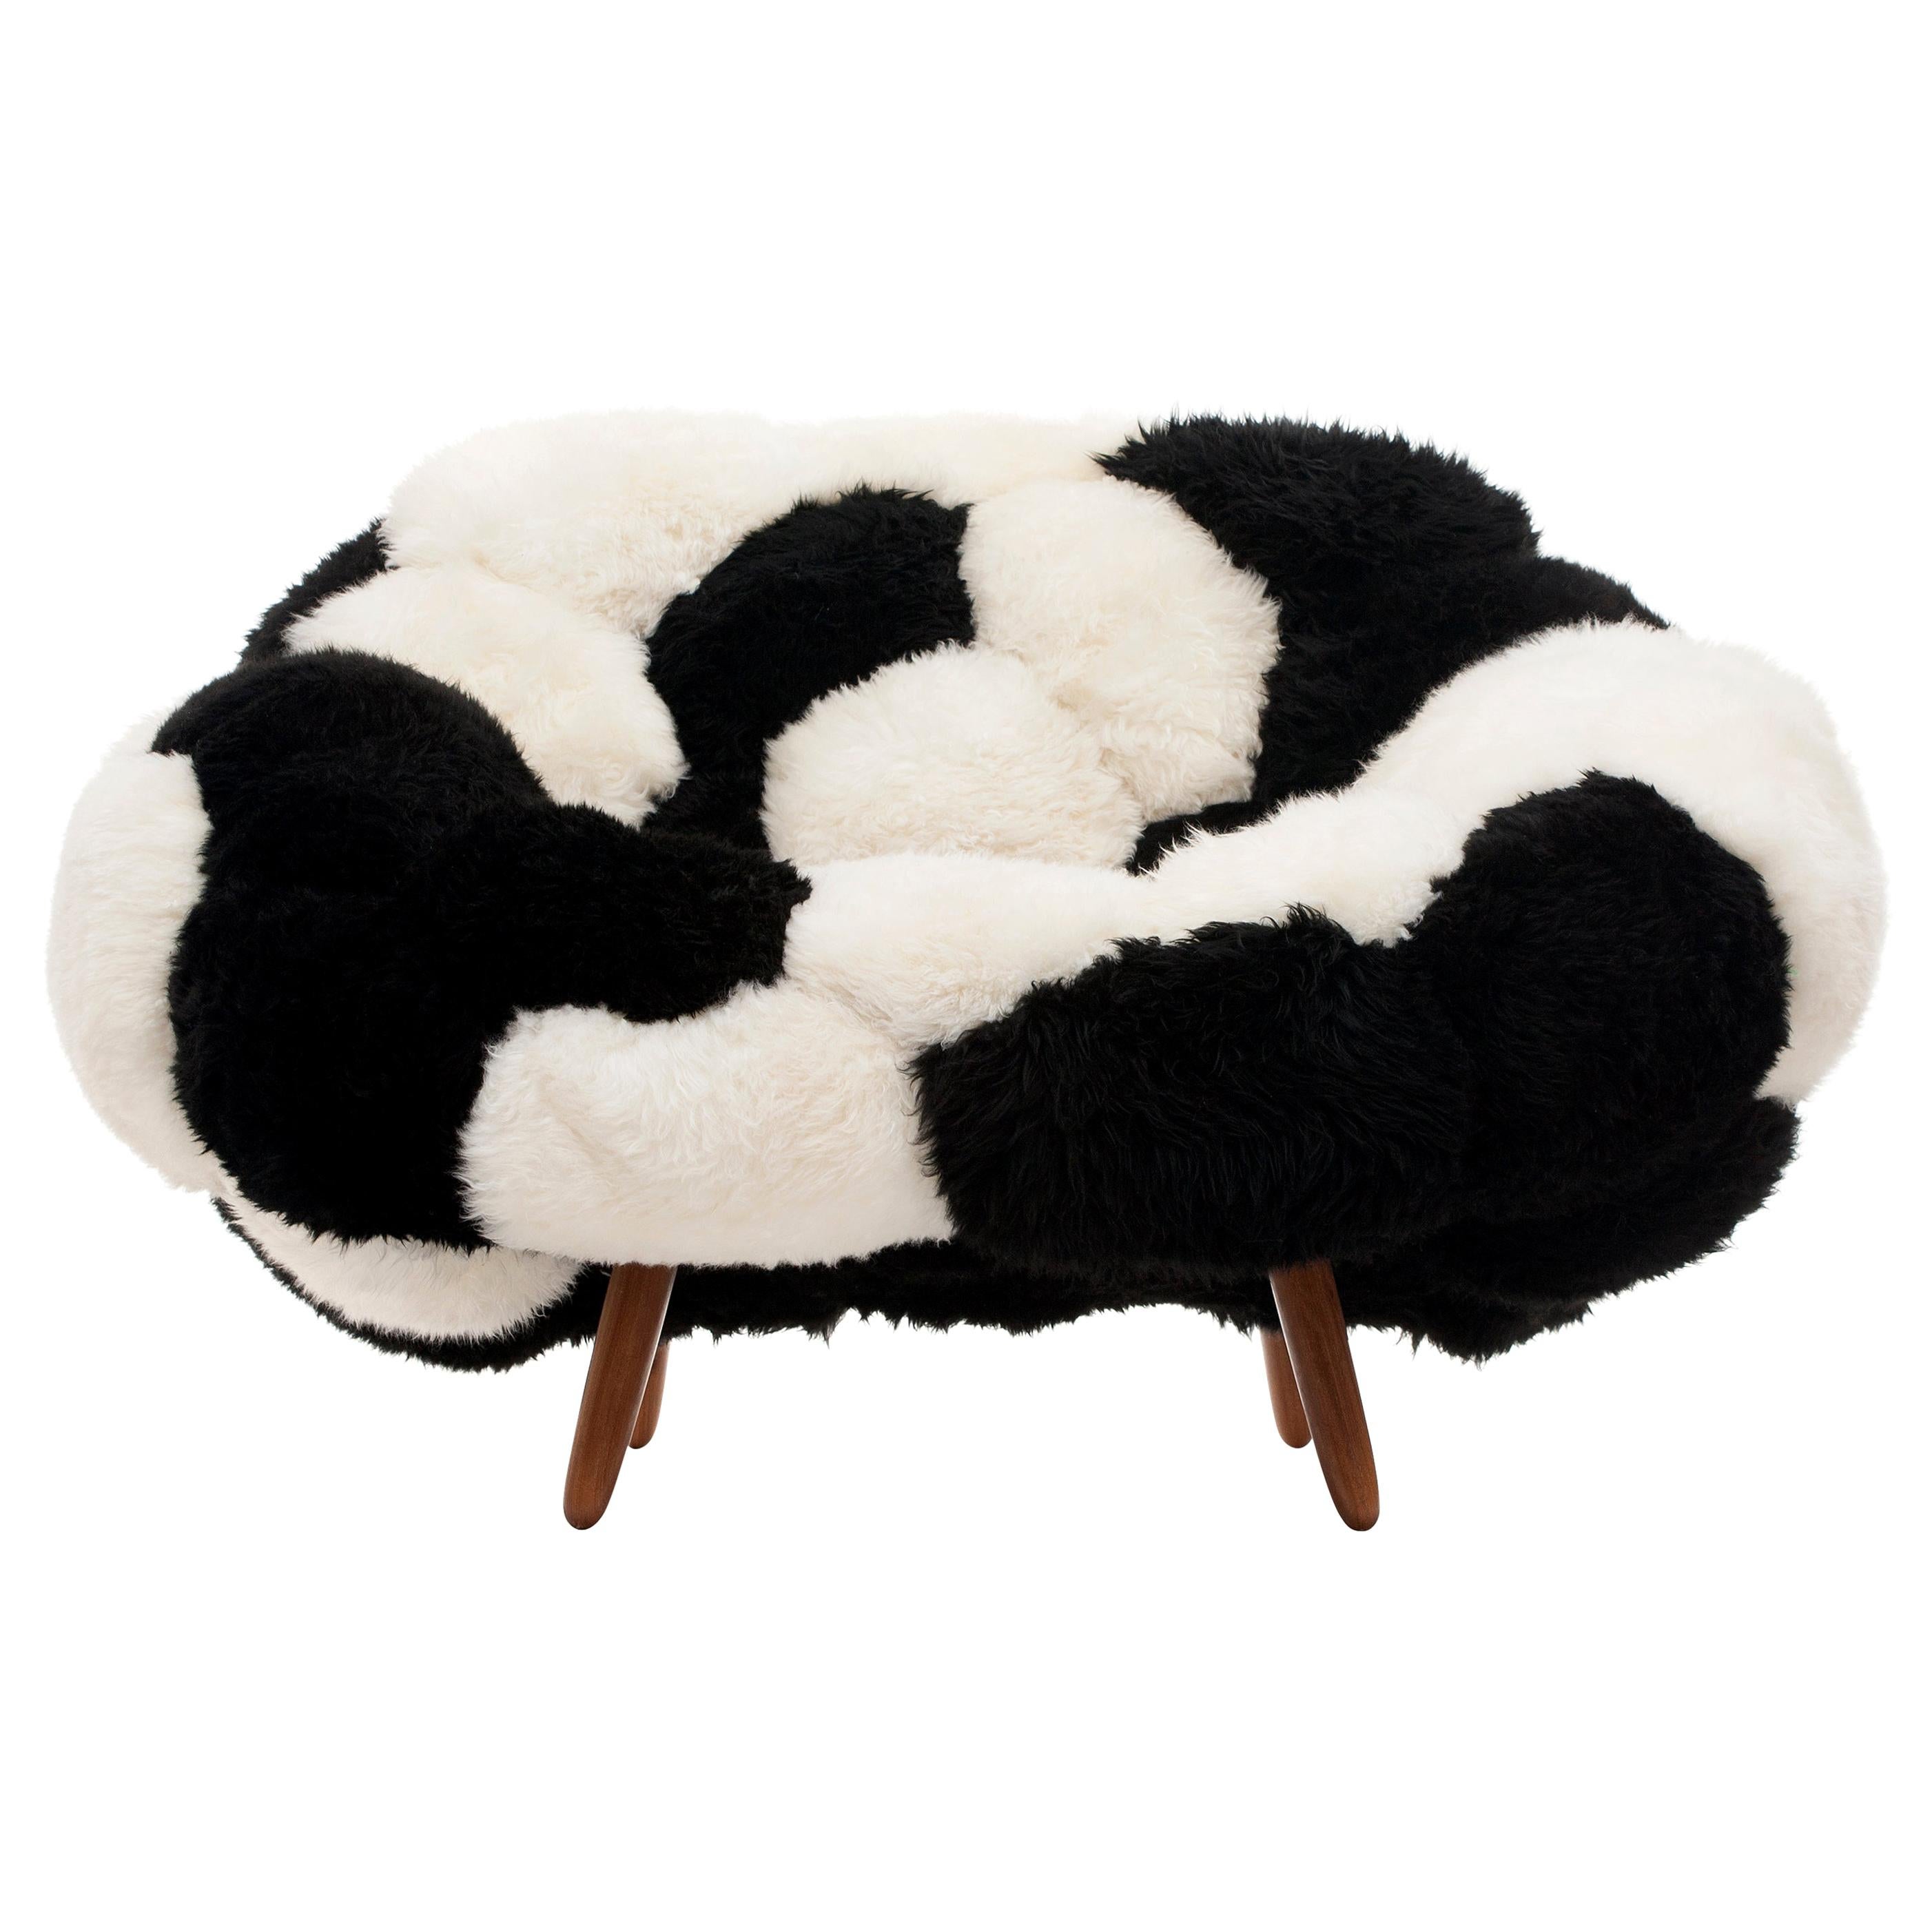 Campana Brothers, "Bolotas Armchair 'Bicolor'", Black and White, Wool, 2018